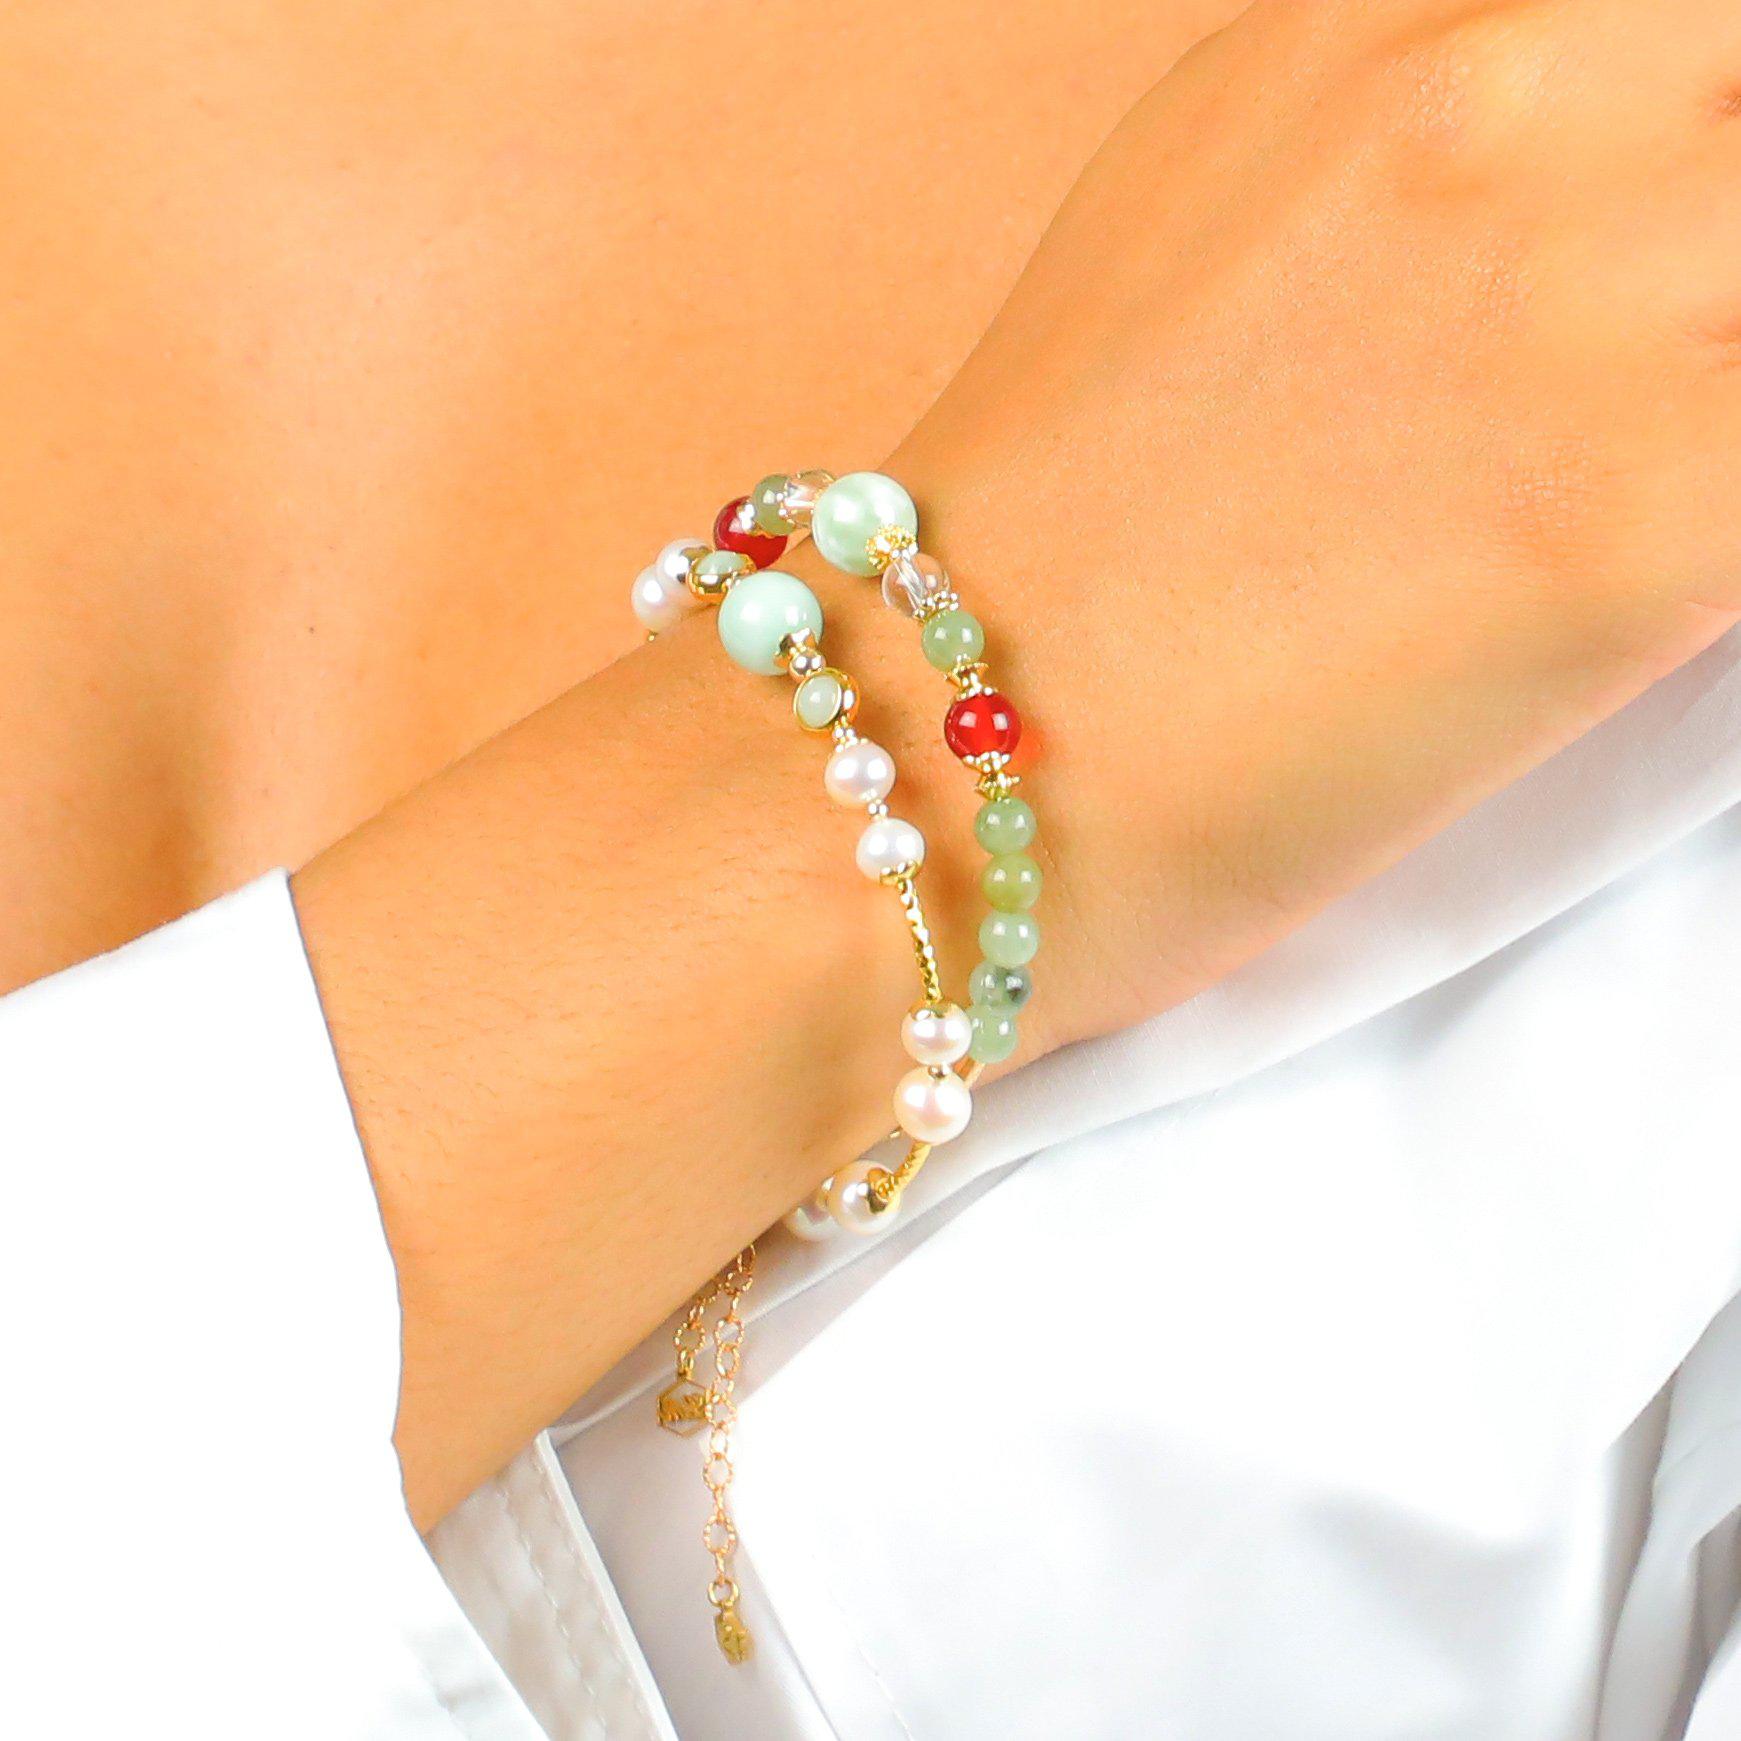 Model wearing two bracelets with Pearls and colorful stones